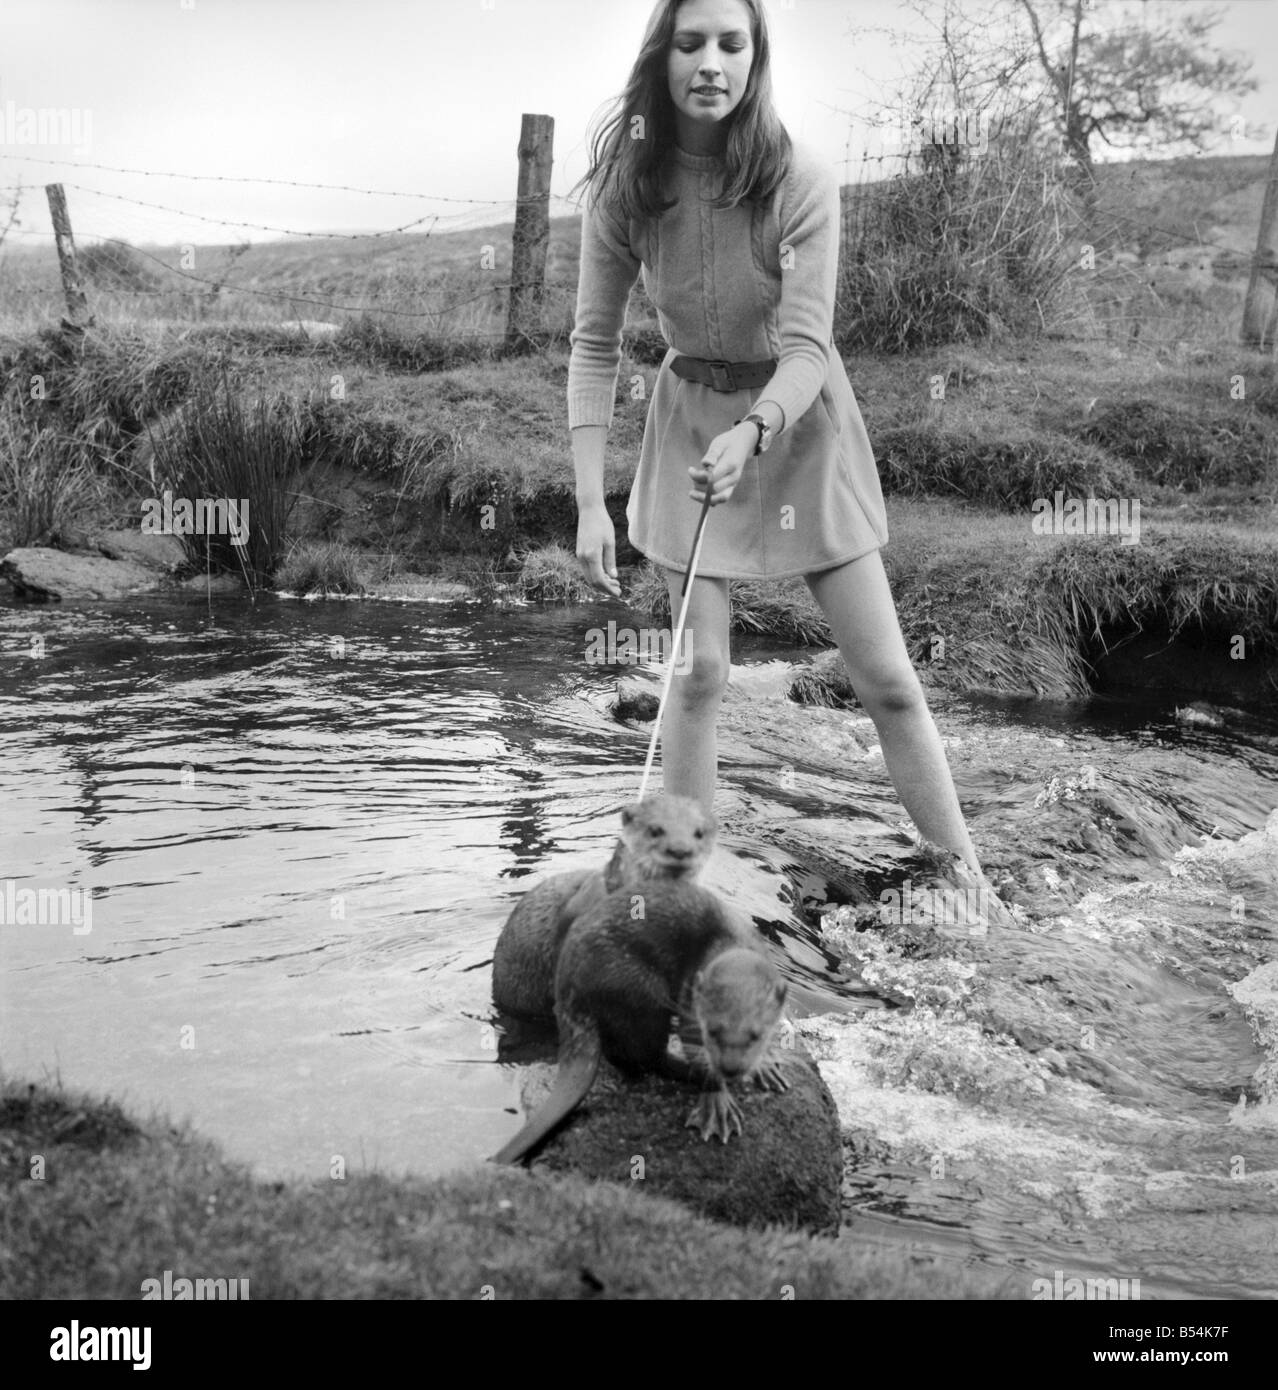 ix Malayan otters are the pets of Vivien Taylor (23) of Bury, Lancs, at her isolated cottage in a lonely part of Dartmoor near Postbridge. She is training the otters for filming next Spring, when the 'star' otter 'Feets' will share the leading role with boy star Mark Lester in a film called 'Loki' about the boy and his strange pet, to be made in Canada. On the bank of the stream near her cottage, Vivien exercises the otters. The 'star' Feets is the otter on a harness and lead. November 1969 Z10877 Stock Photo